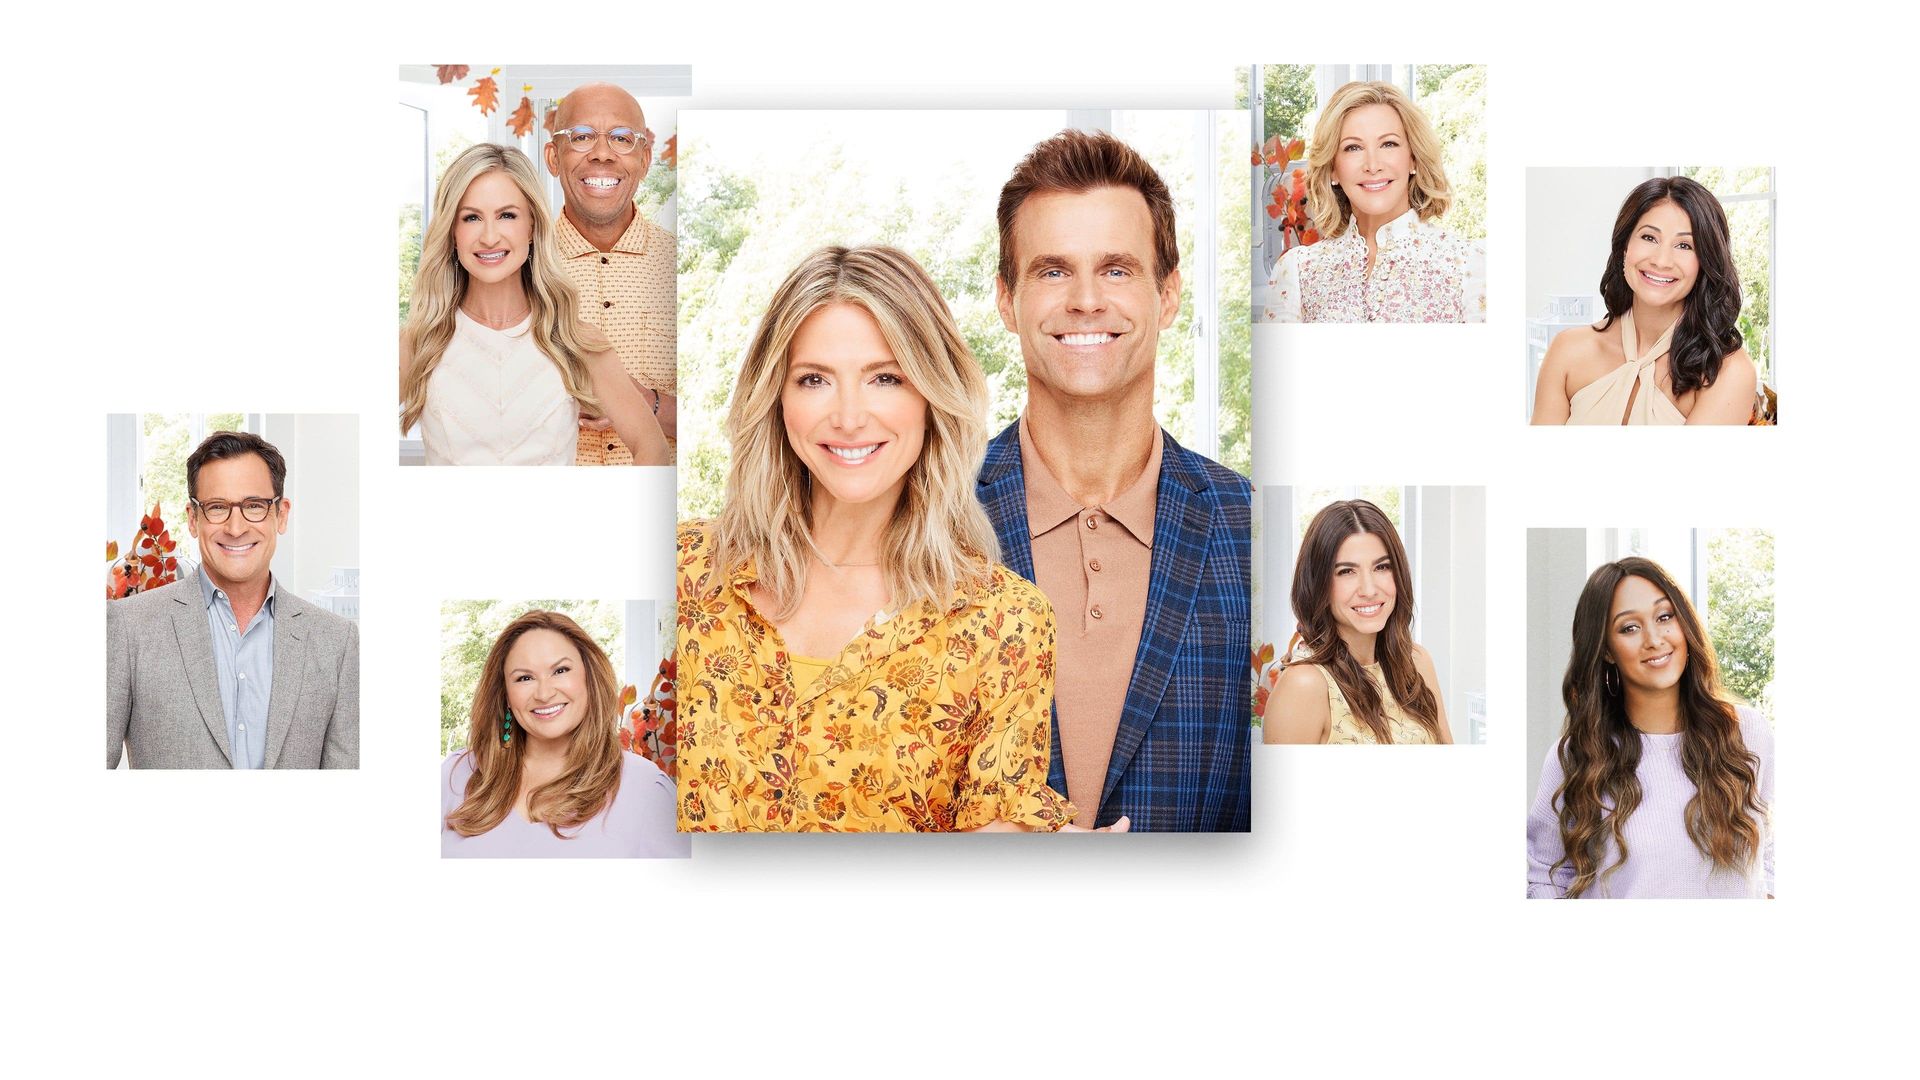 Home & Family background